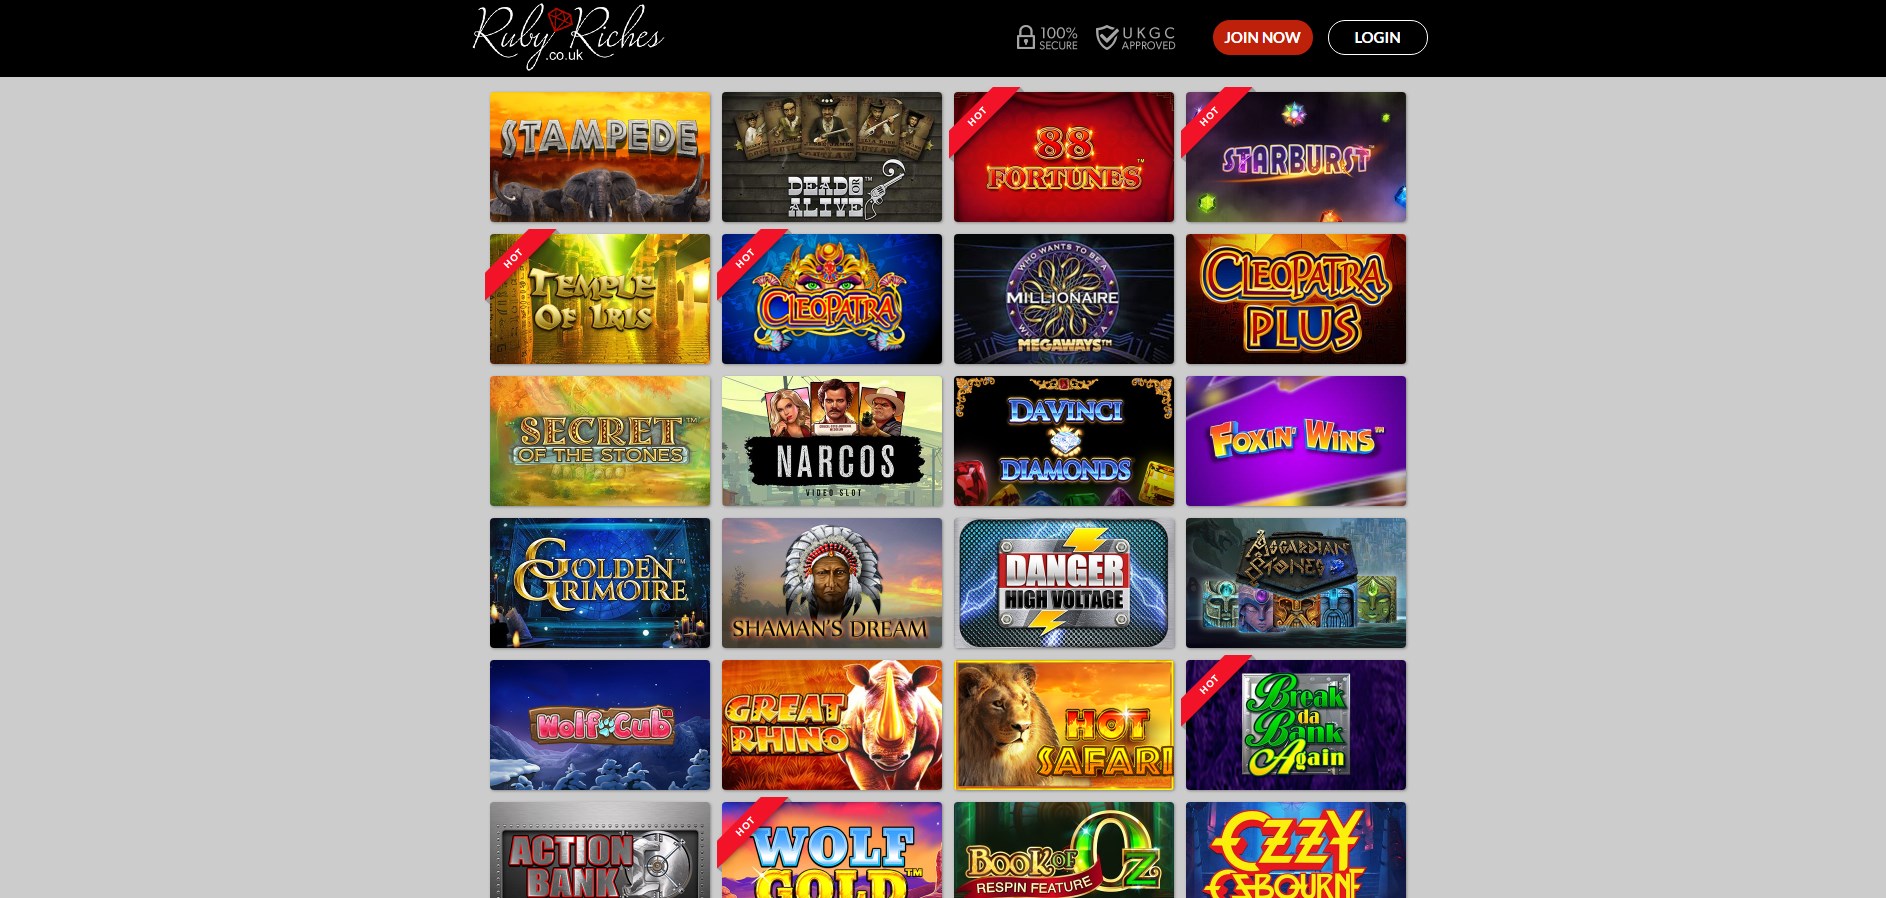 Ruby Riches Casino Games